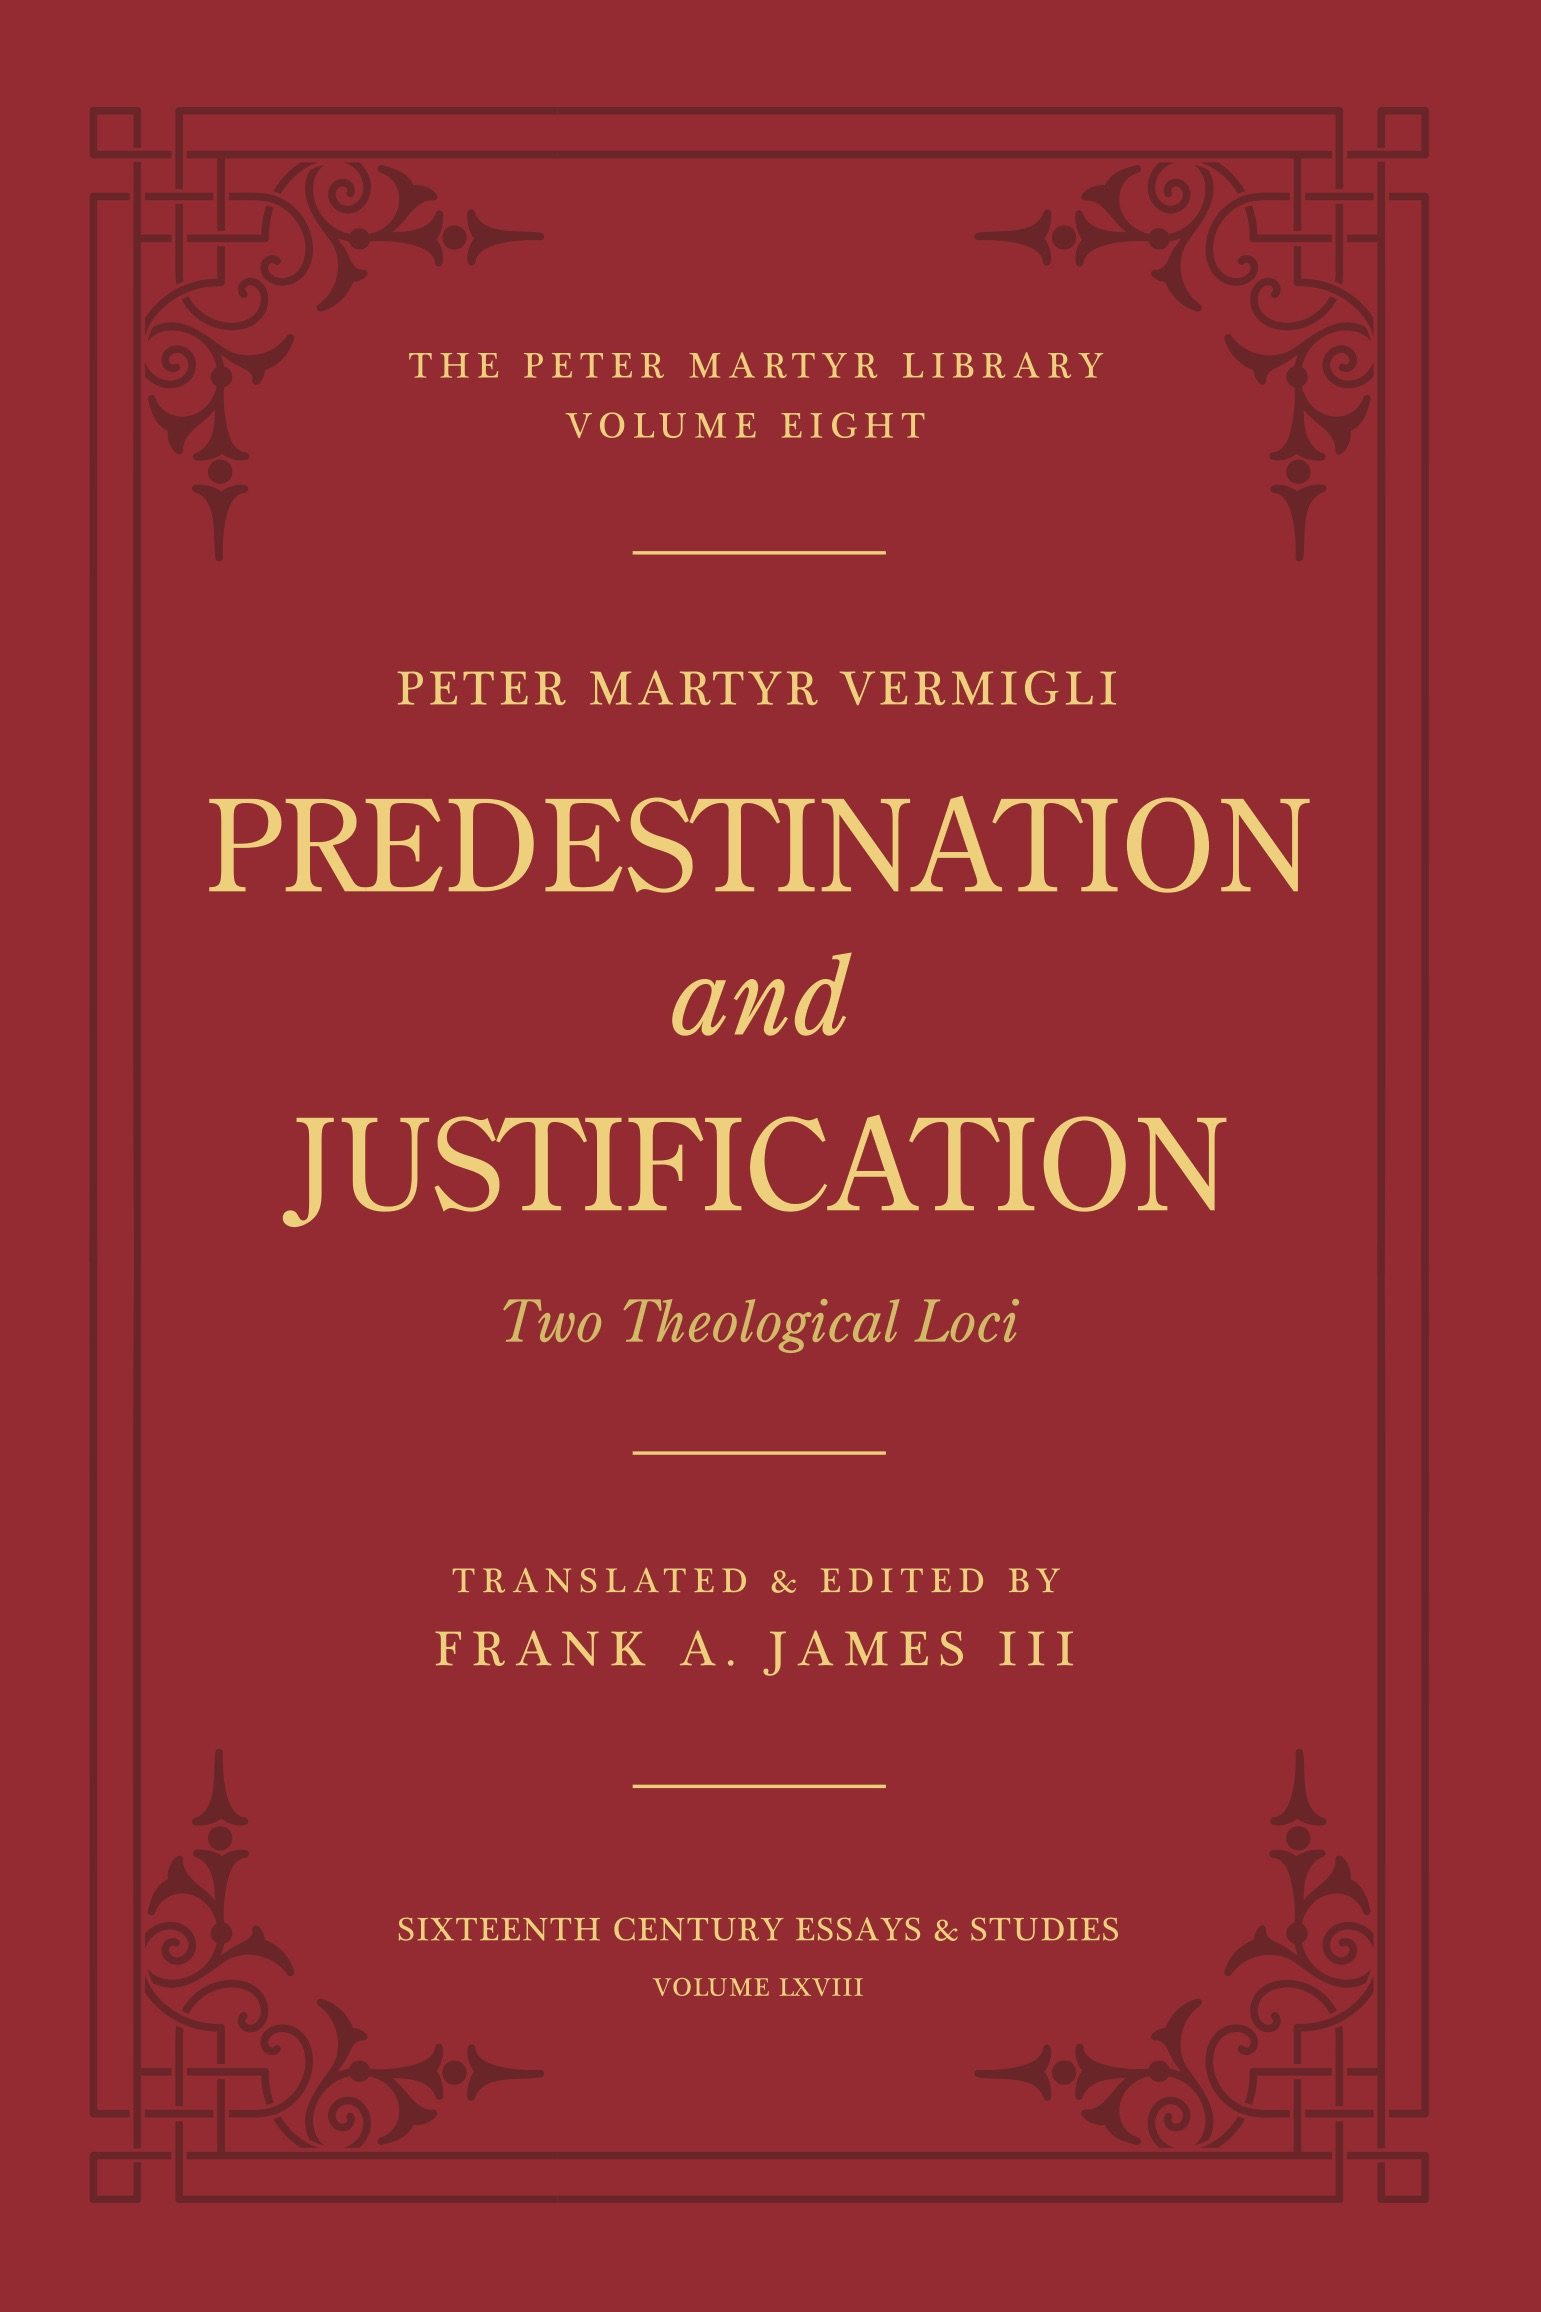 Predestination and Justification: Two Theological Loci